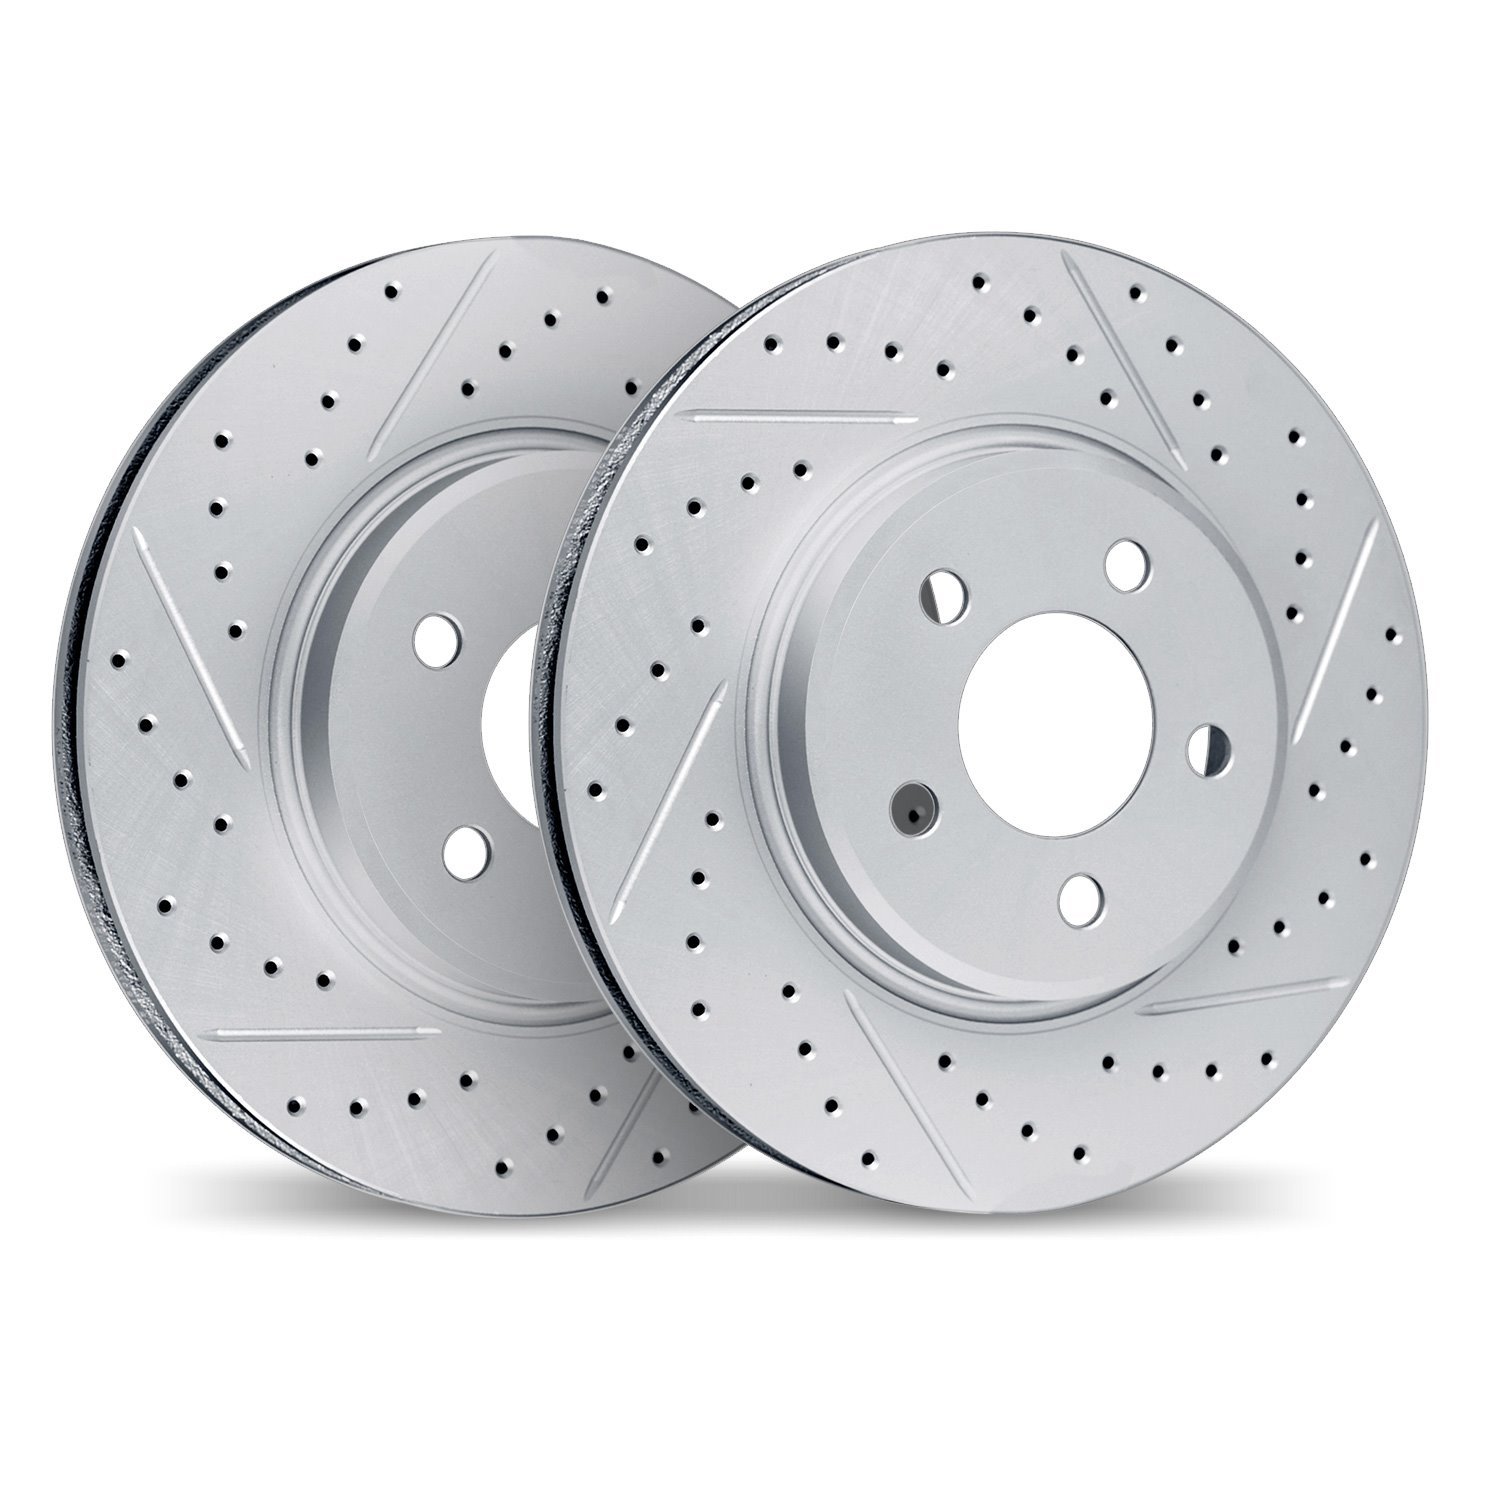 2002-54086 Geoperformance Drilled/Slotted Brake Rotors, 2004-2007 Ford/Lincoln/Mercury/Mazda, Position: Front